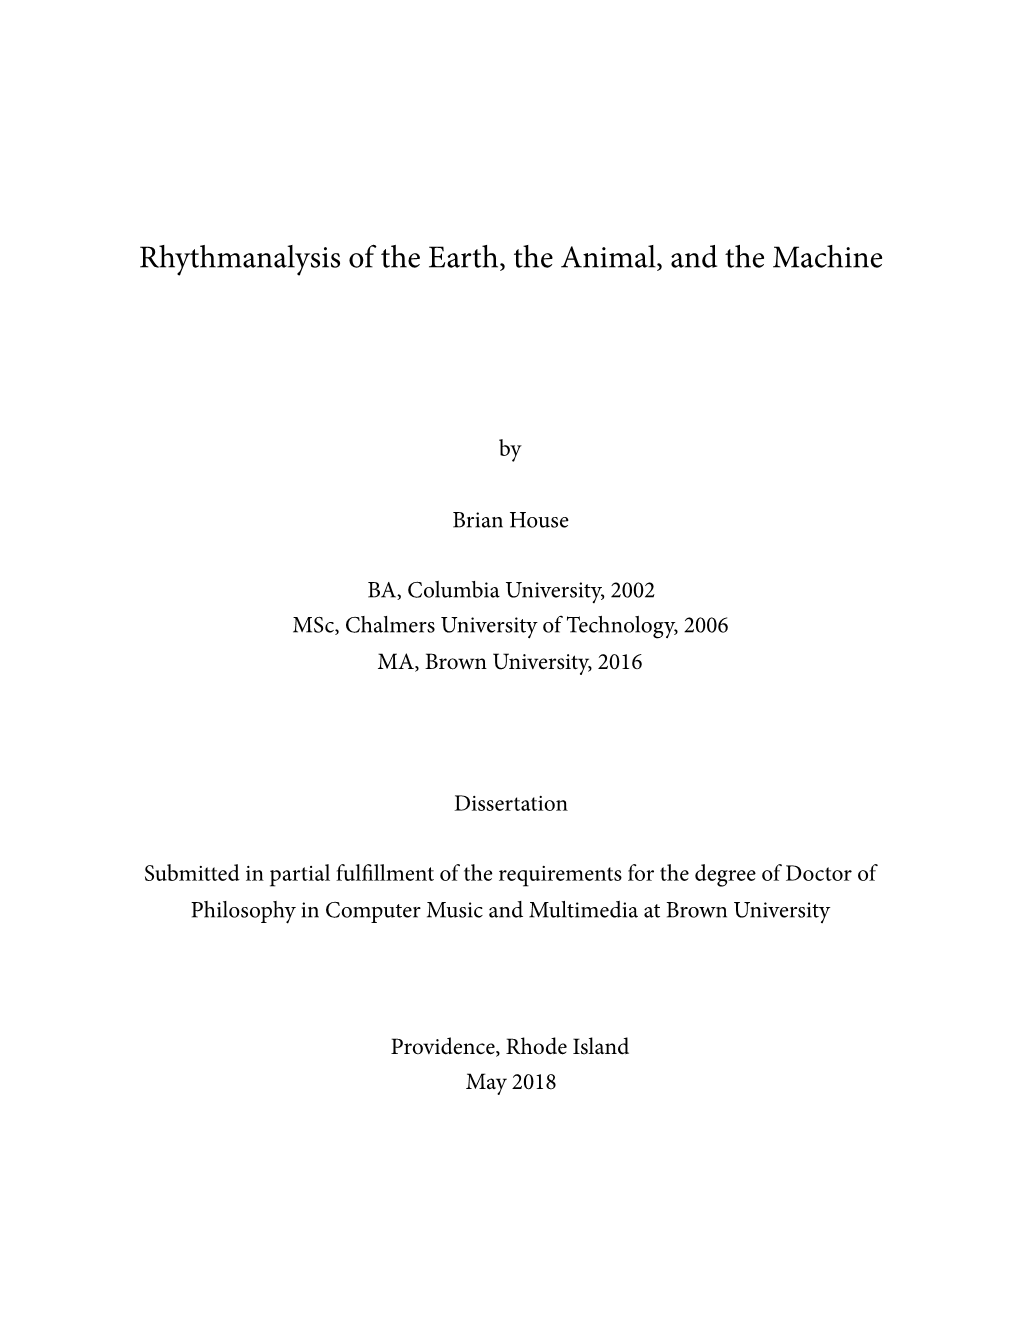 Rhythmanalysis of the Earth, the Animal, and the Machine